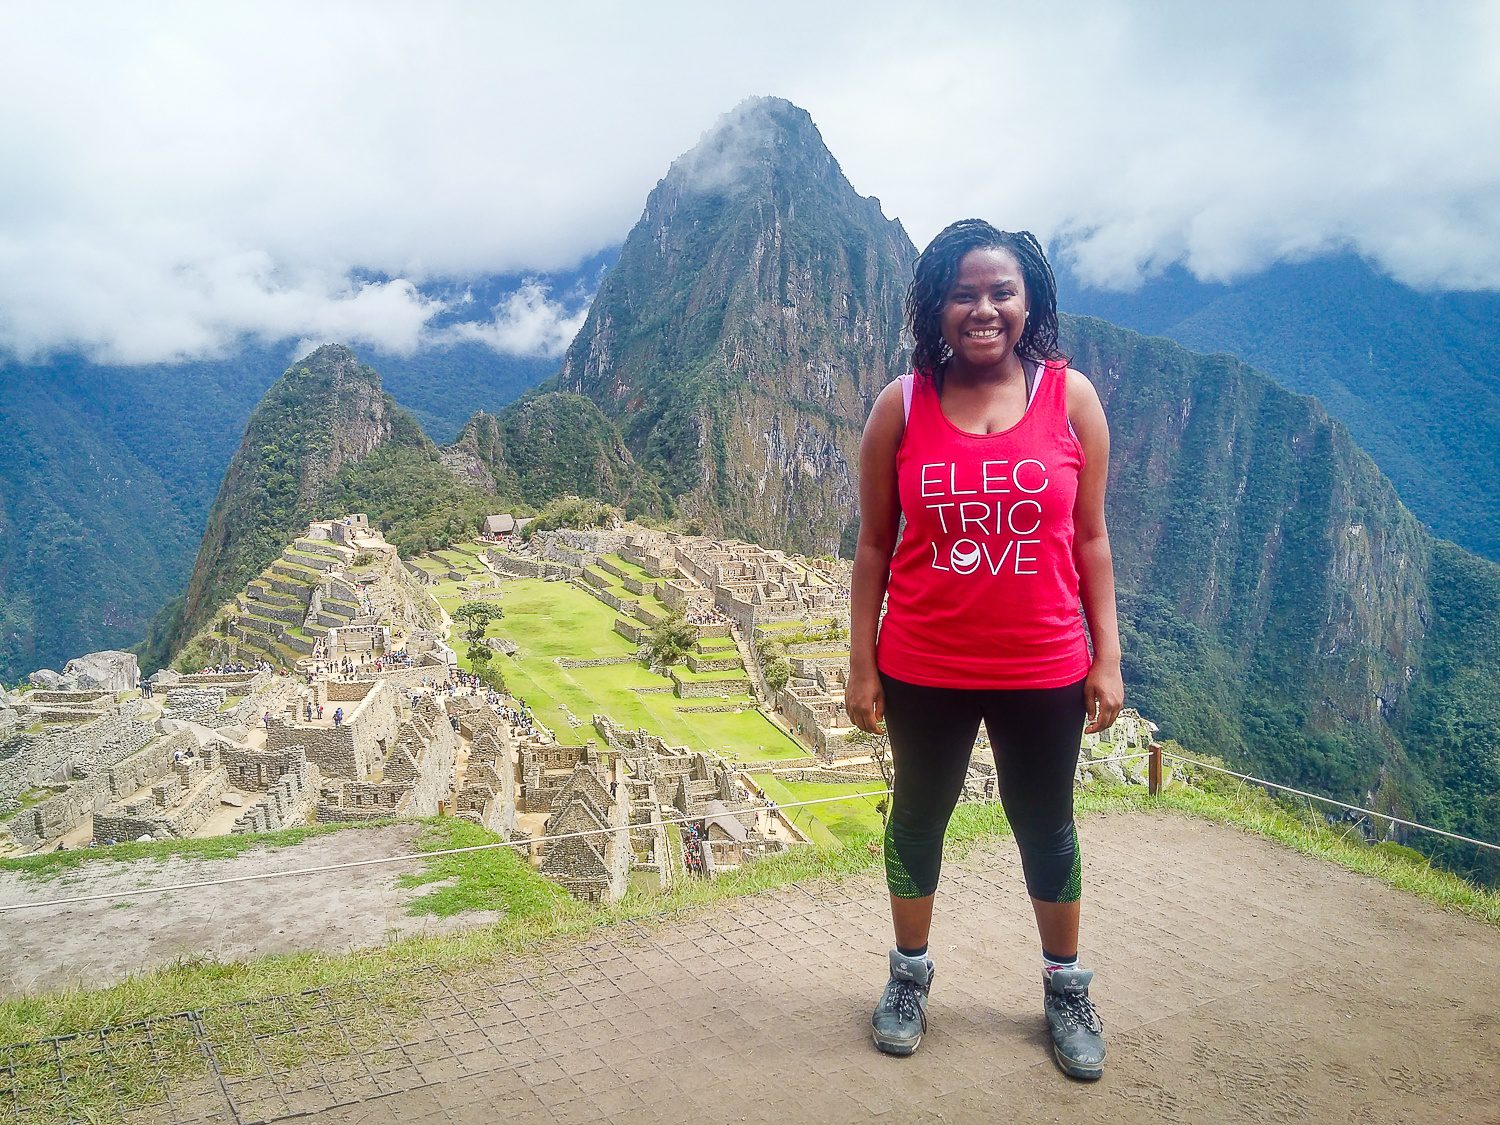 Learn Steph's tips to travel the world affordably as a student!